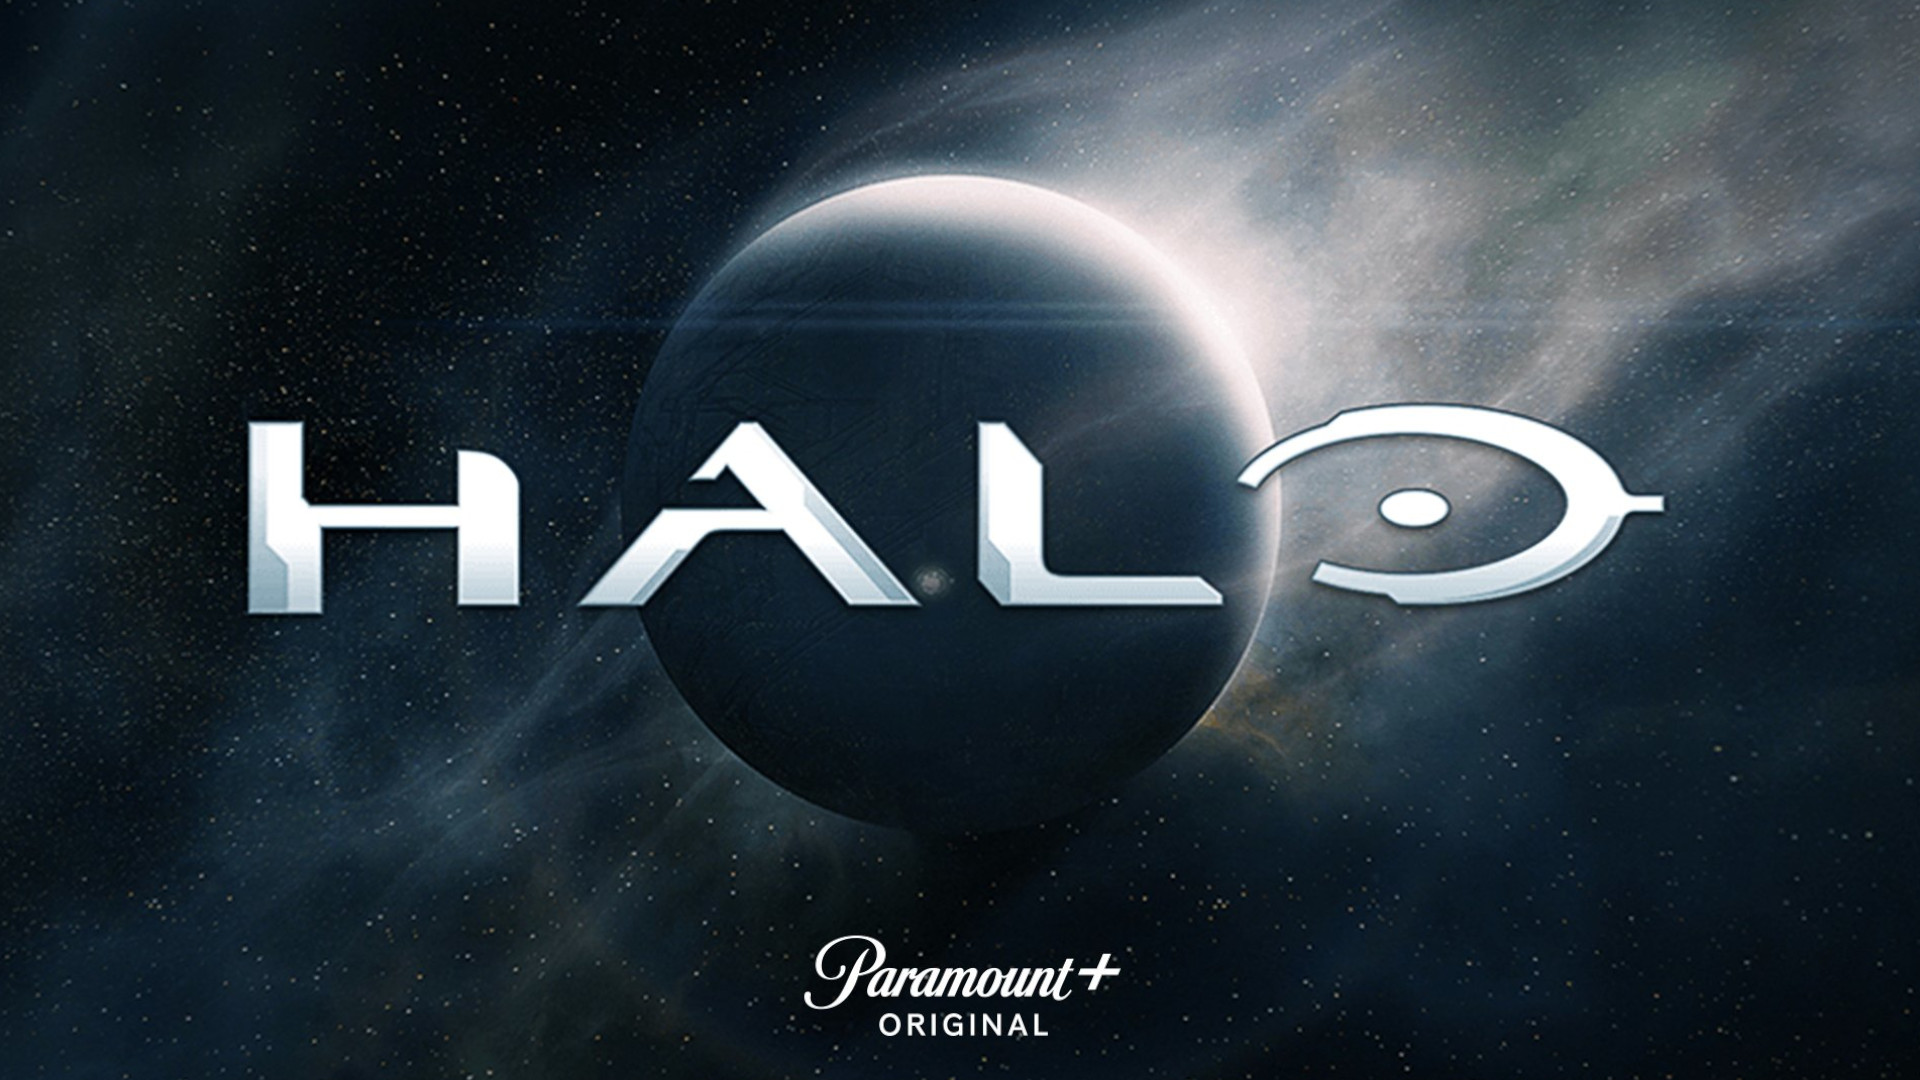 The Halo TV series gets an action-packed new trailer and release date